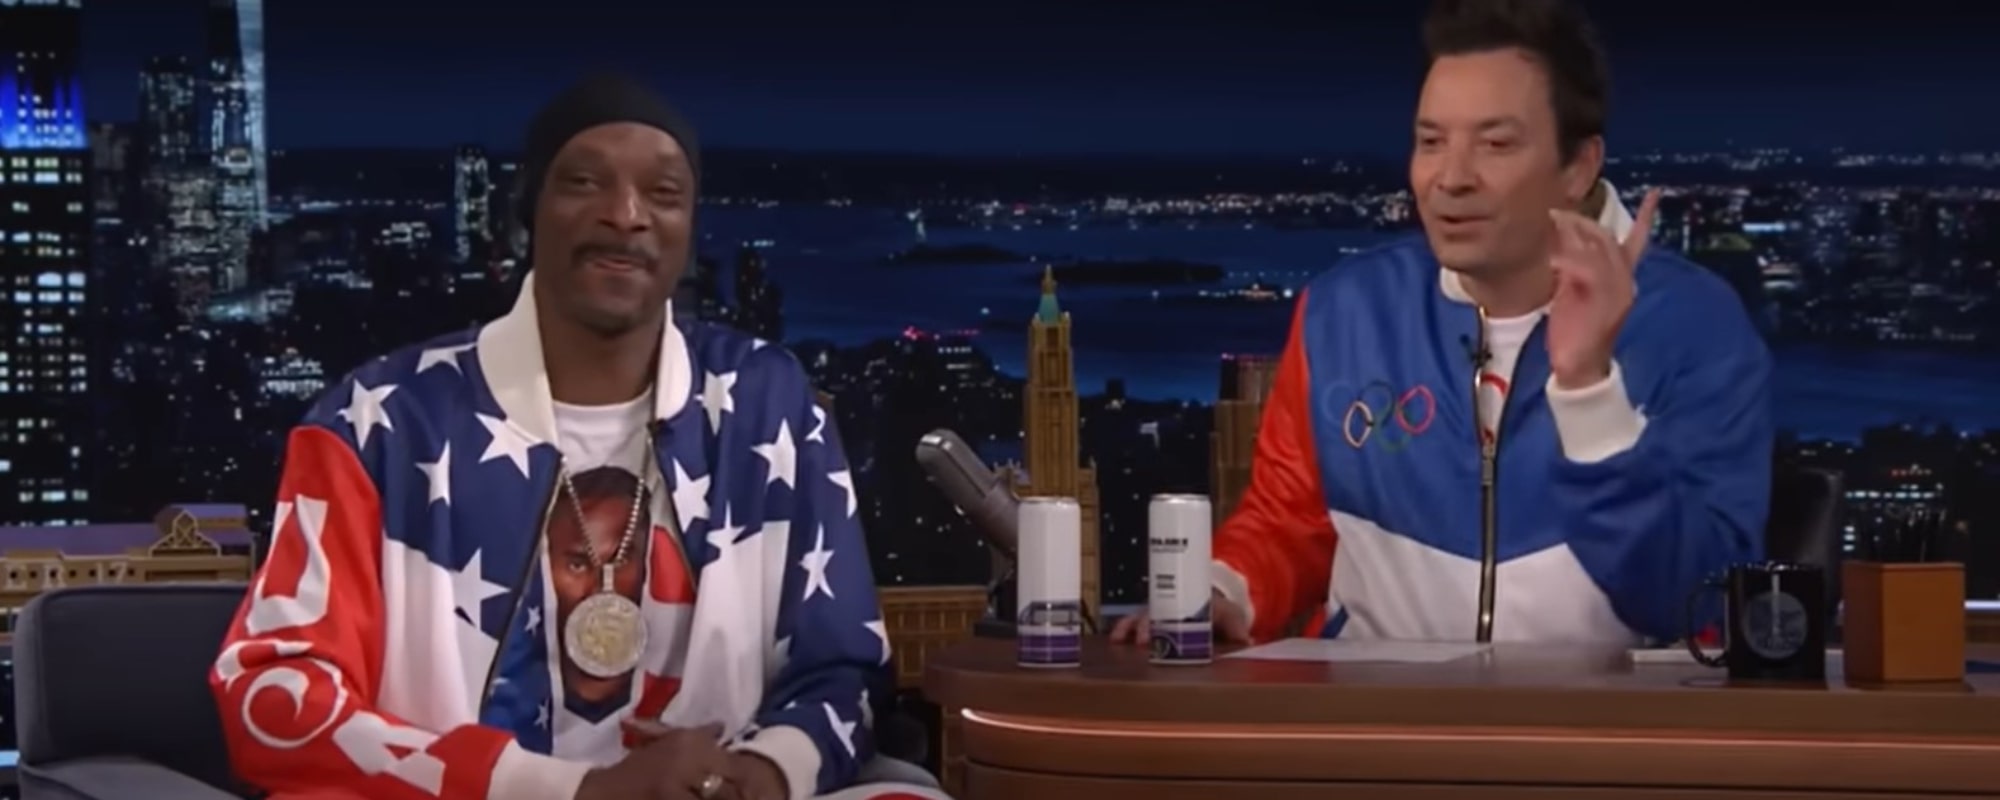 Snoop Dogg Reveals What ‘The Voice’ Fans Are Going To Learn About Him as a Coach